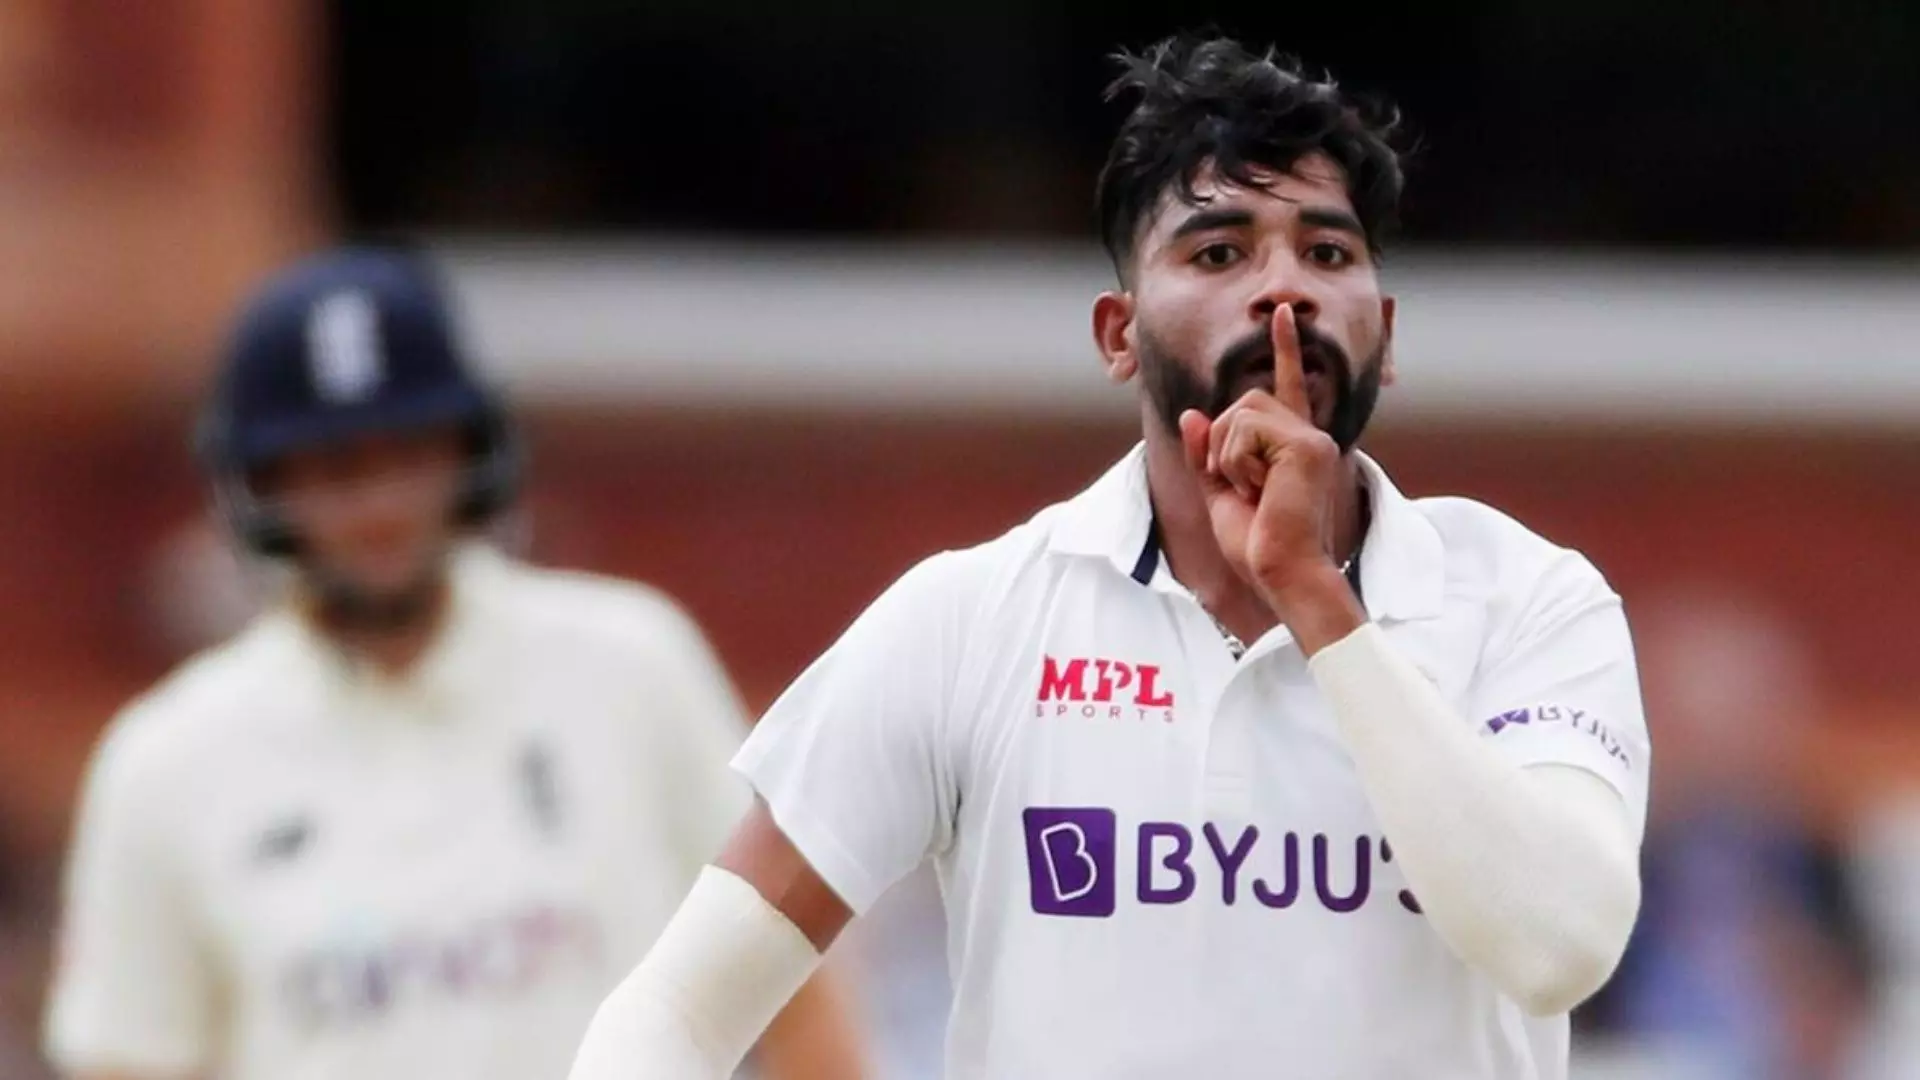 Mohammed Siraj Clarifies about his way of New Celebration When he Get the Wicket in India Vs England Test Series